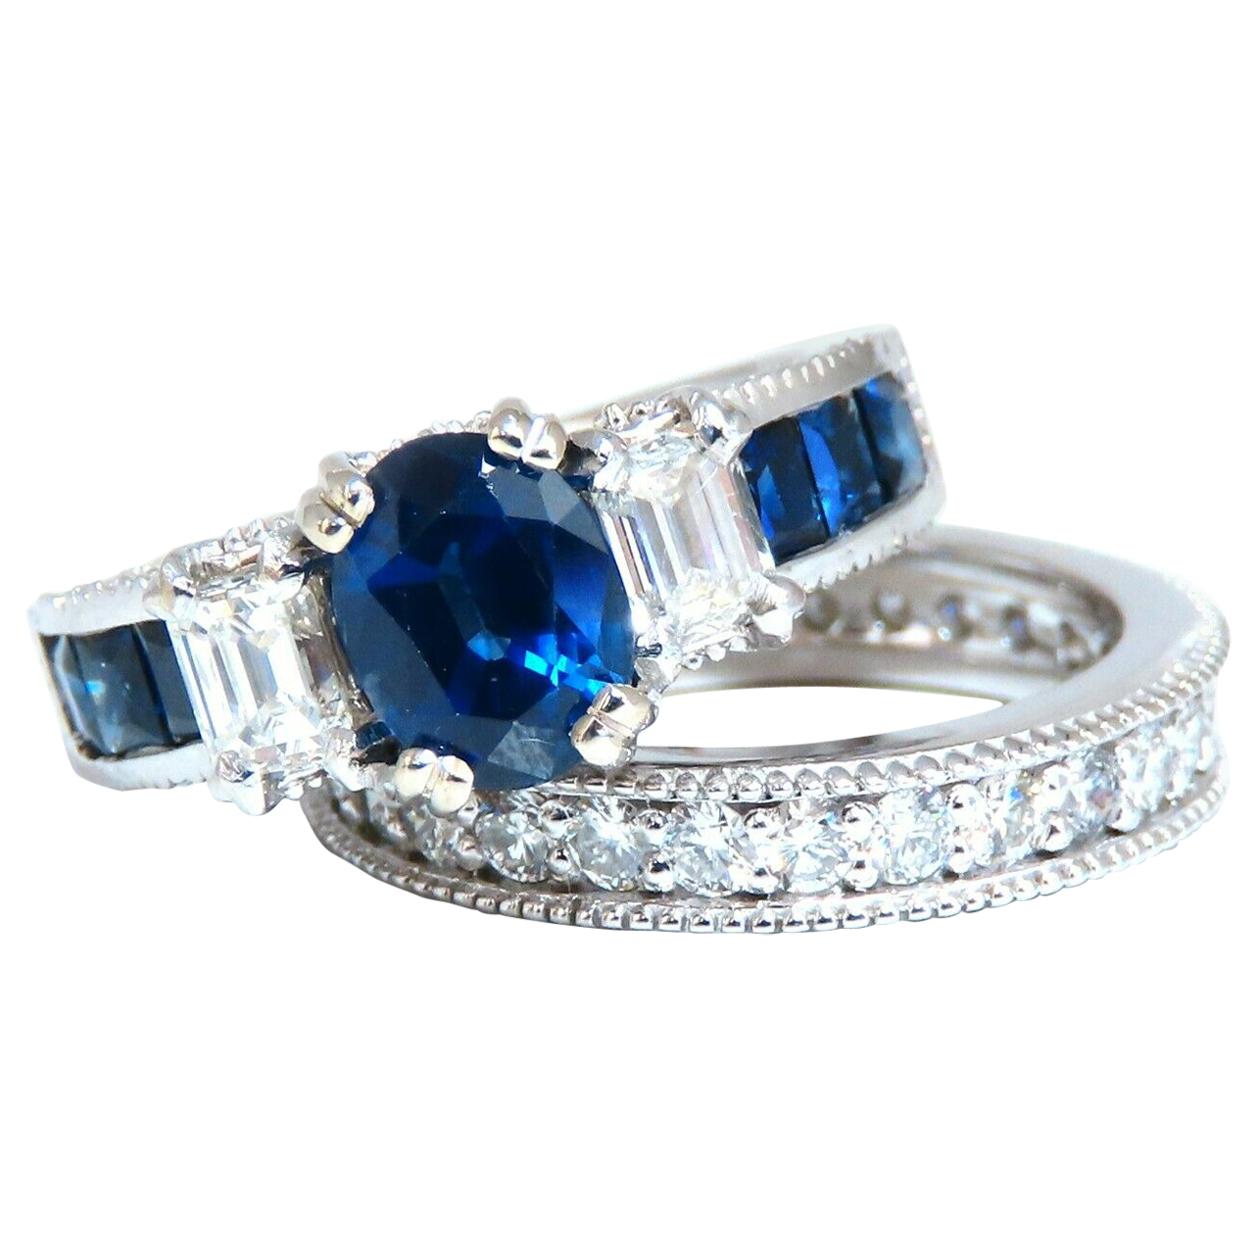 GIA Certified 1.86 Carat Natural Sapphire Diamonds Ring & Matching Eternity Band